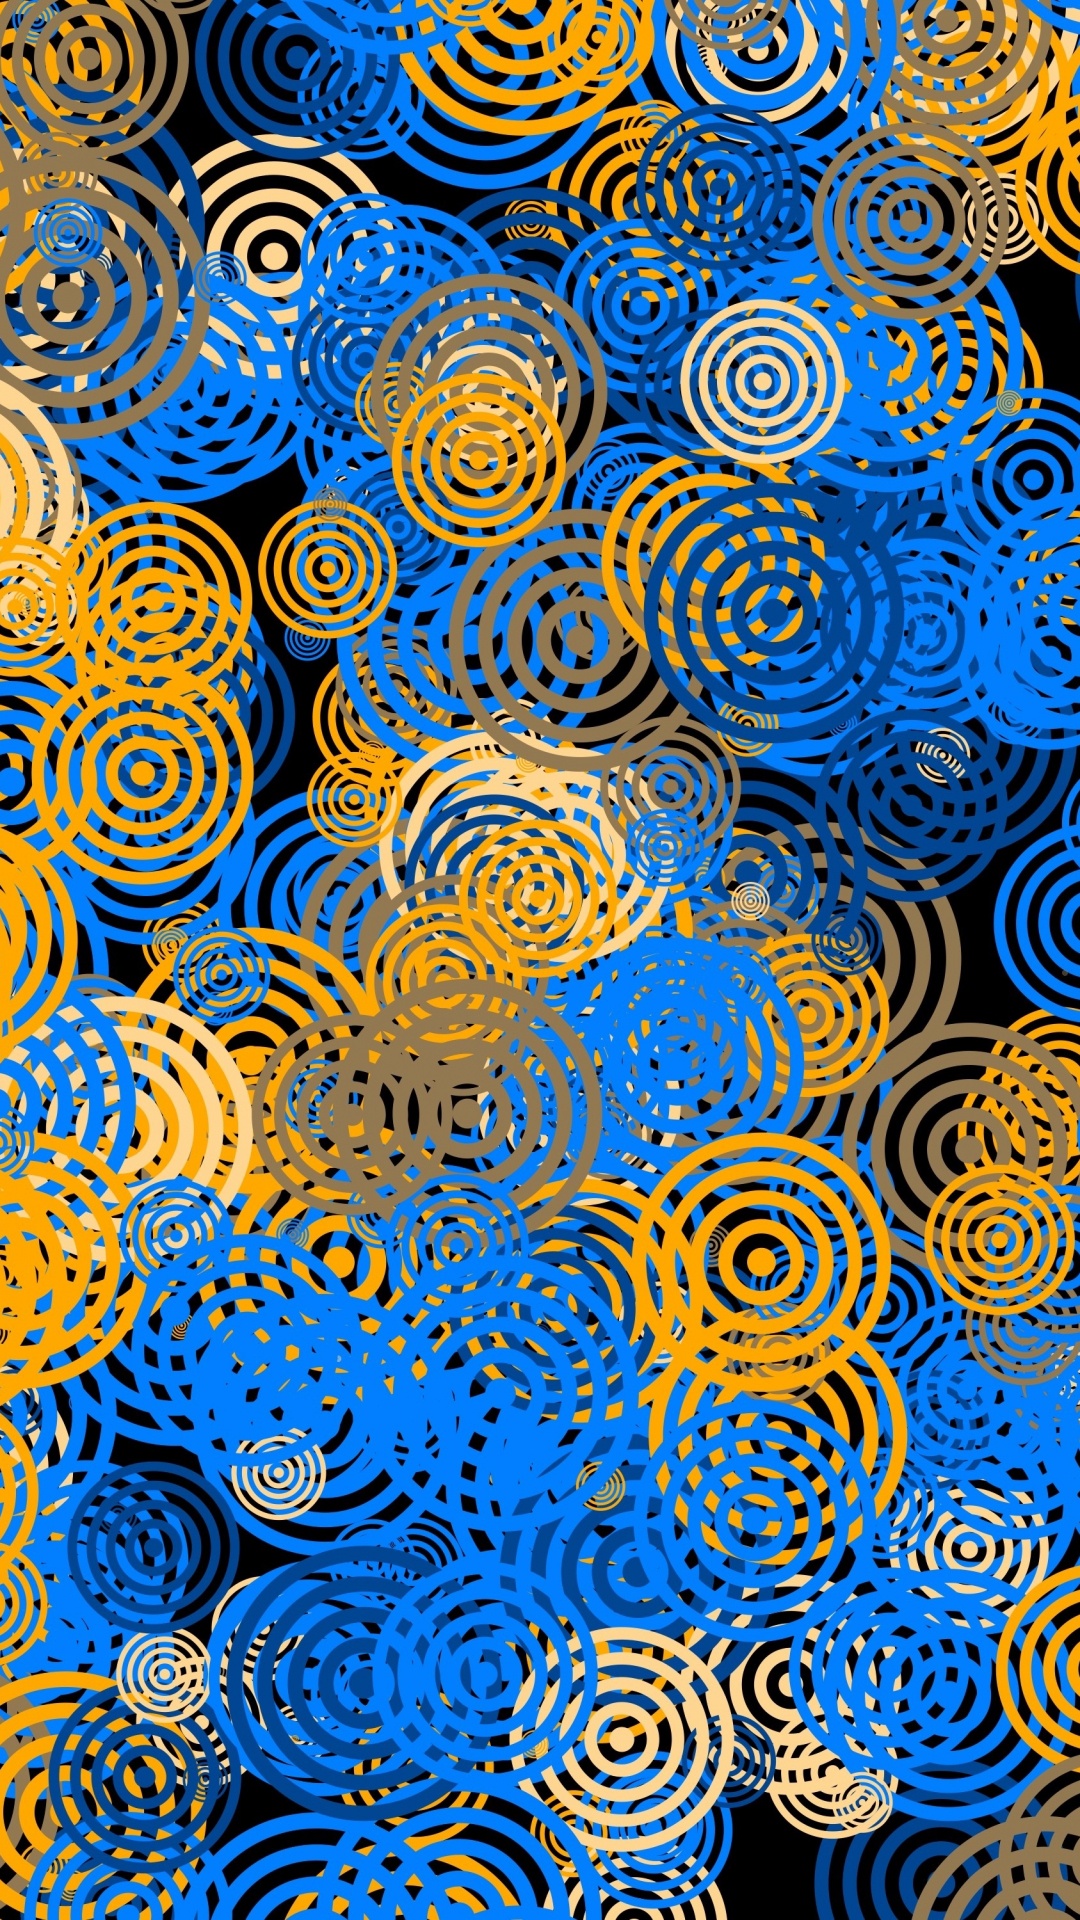 Blue and Yellow Round Decor. Wallpaper in 1080x1920 Resolution